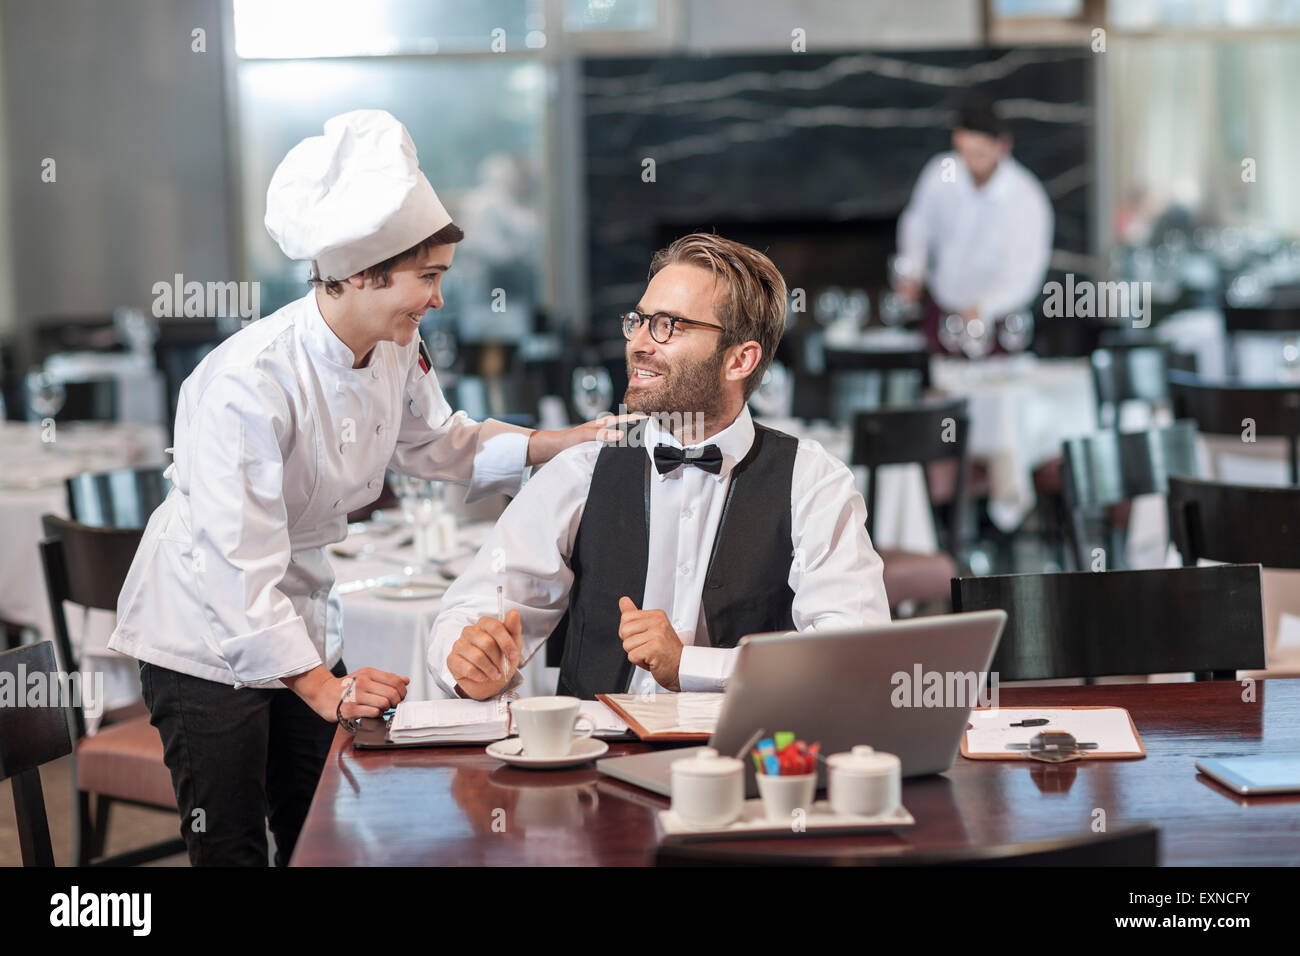 Restaurant chef and manager discussing reservations Stock Photo